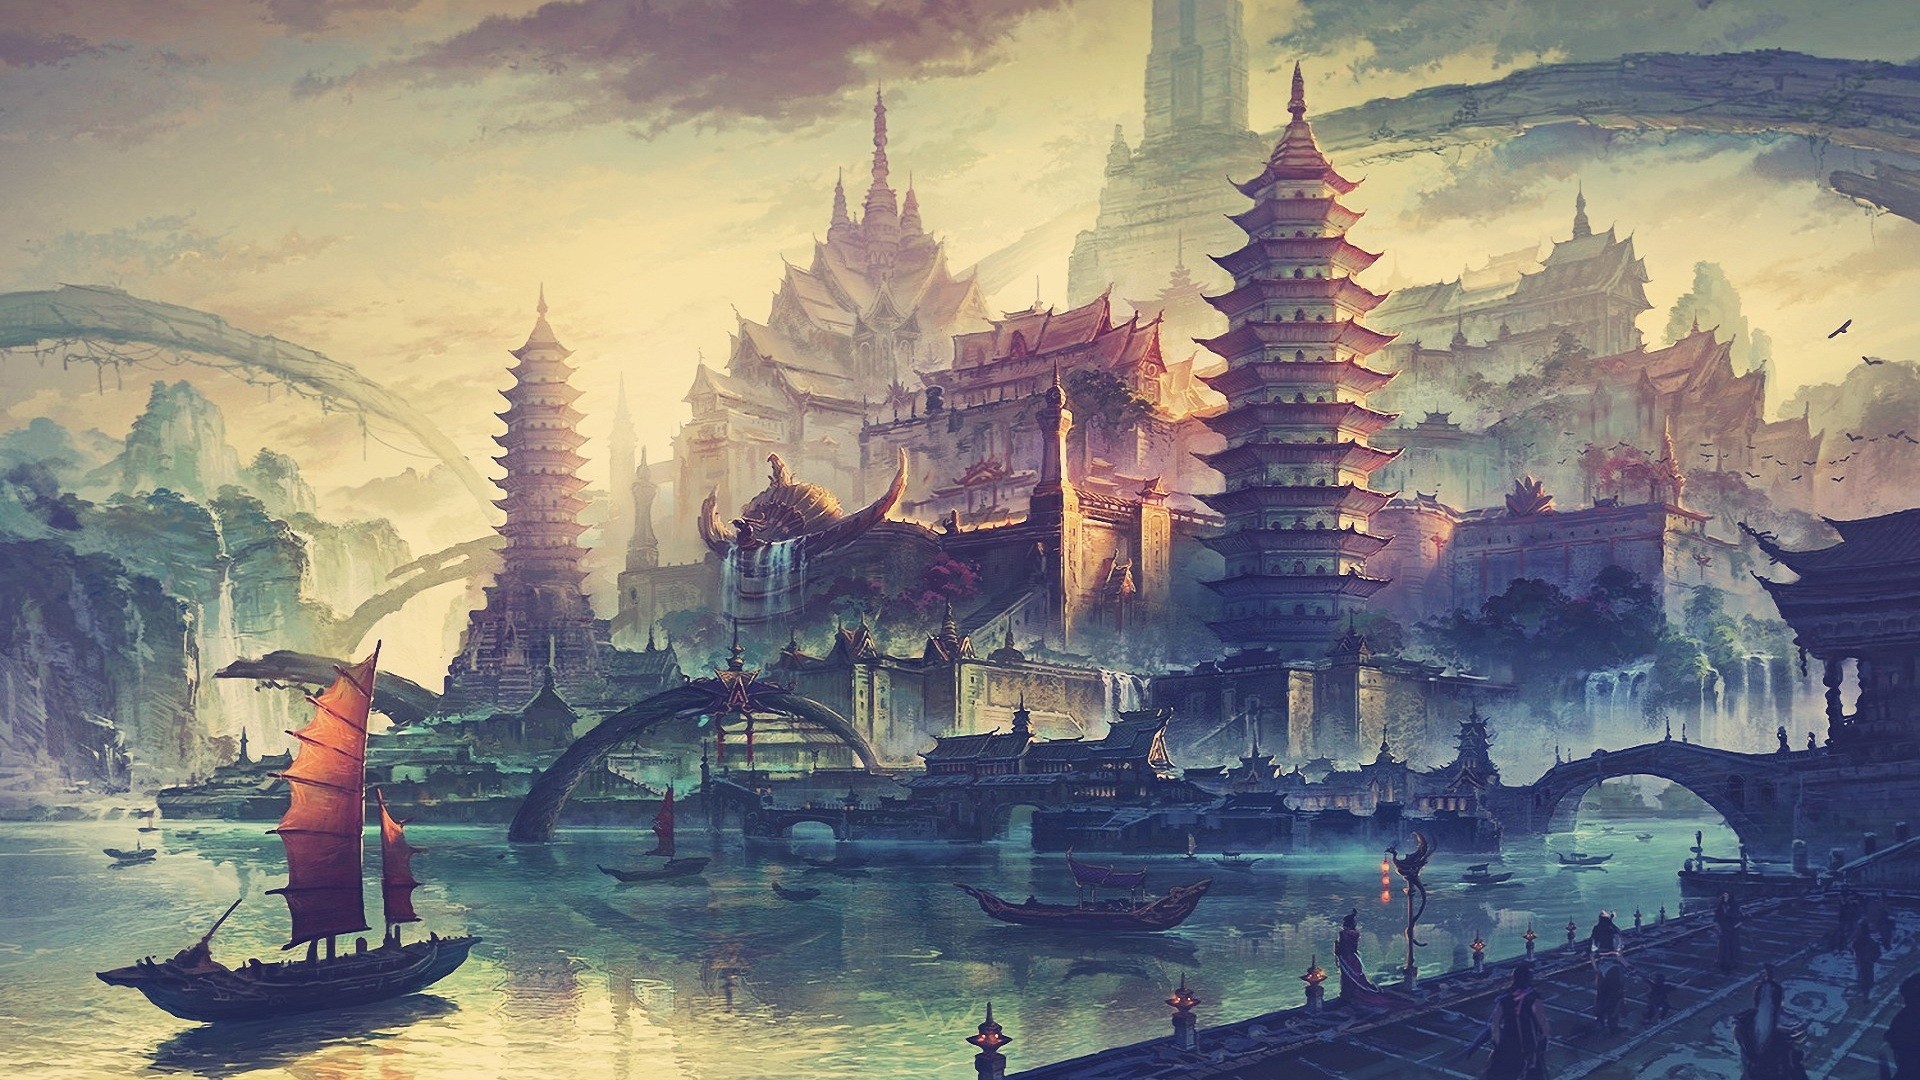 General 1920x1080 Chinese architecture fantasy art China traditional art Asian architecture Chinese ship boat Asia